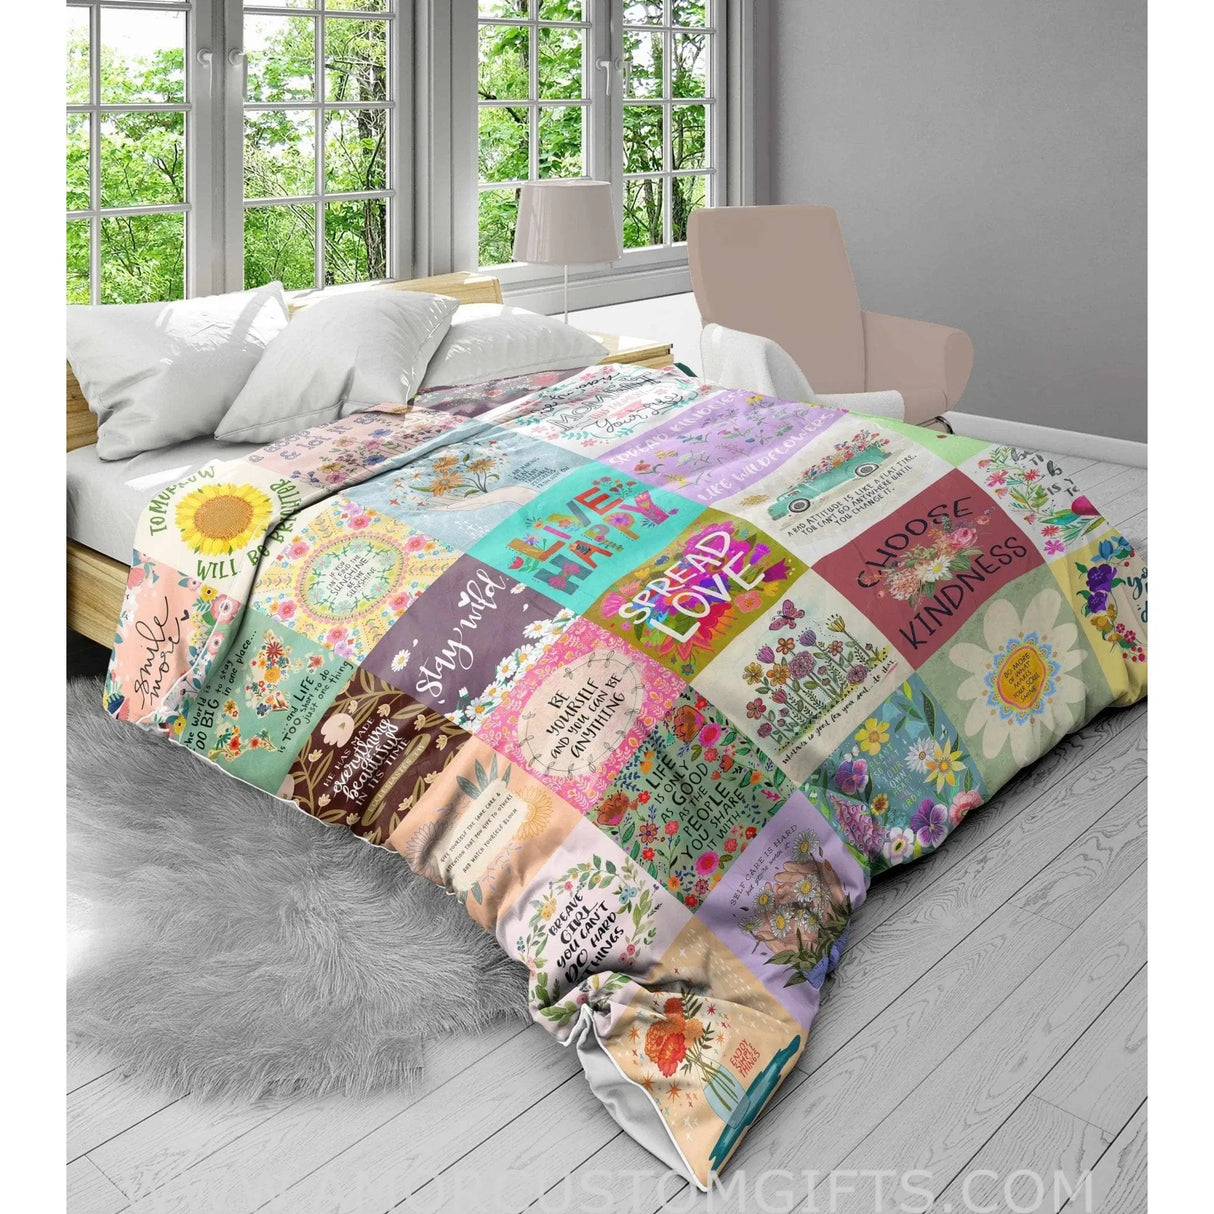 Blankets Taste Of Life With Nature Patchwork Blanket, Personalized Custom Floral Fleece Blanket,  Customized Blanket